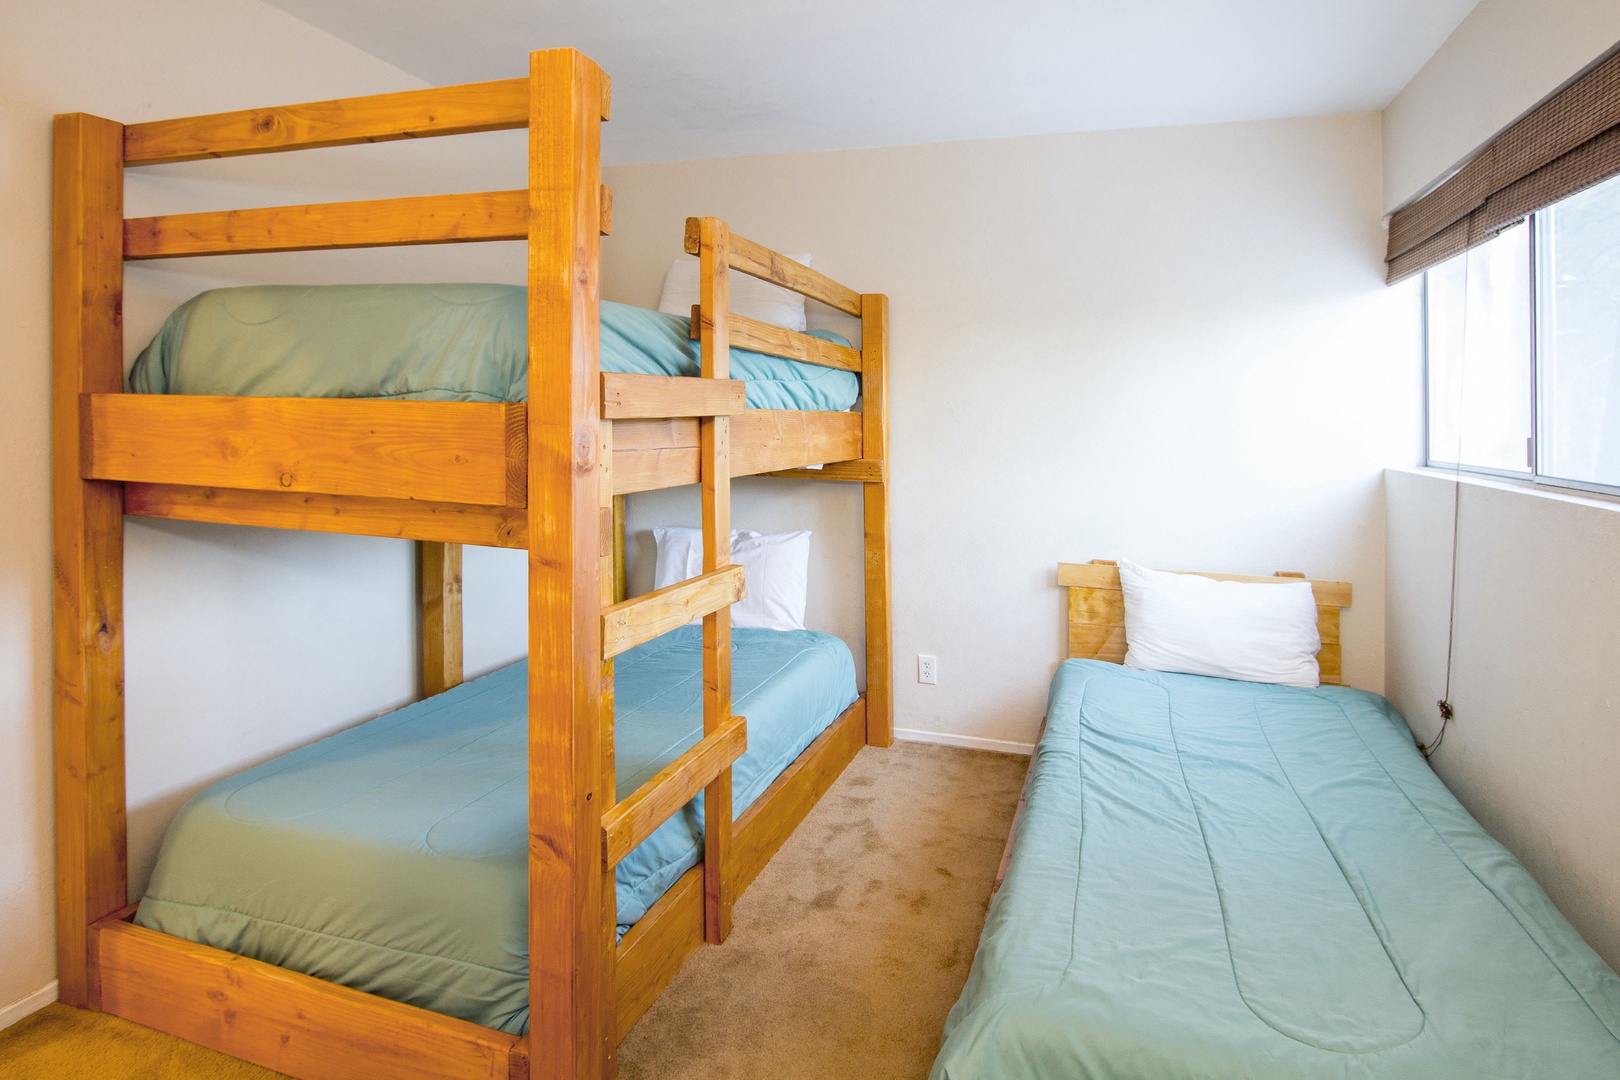 Bedroom 2: Bunk bed and Twin bed